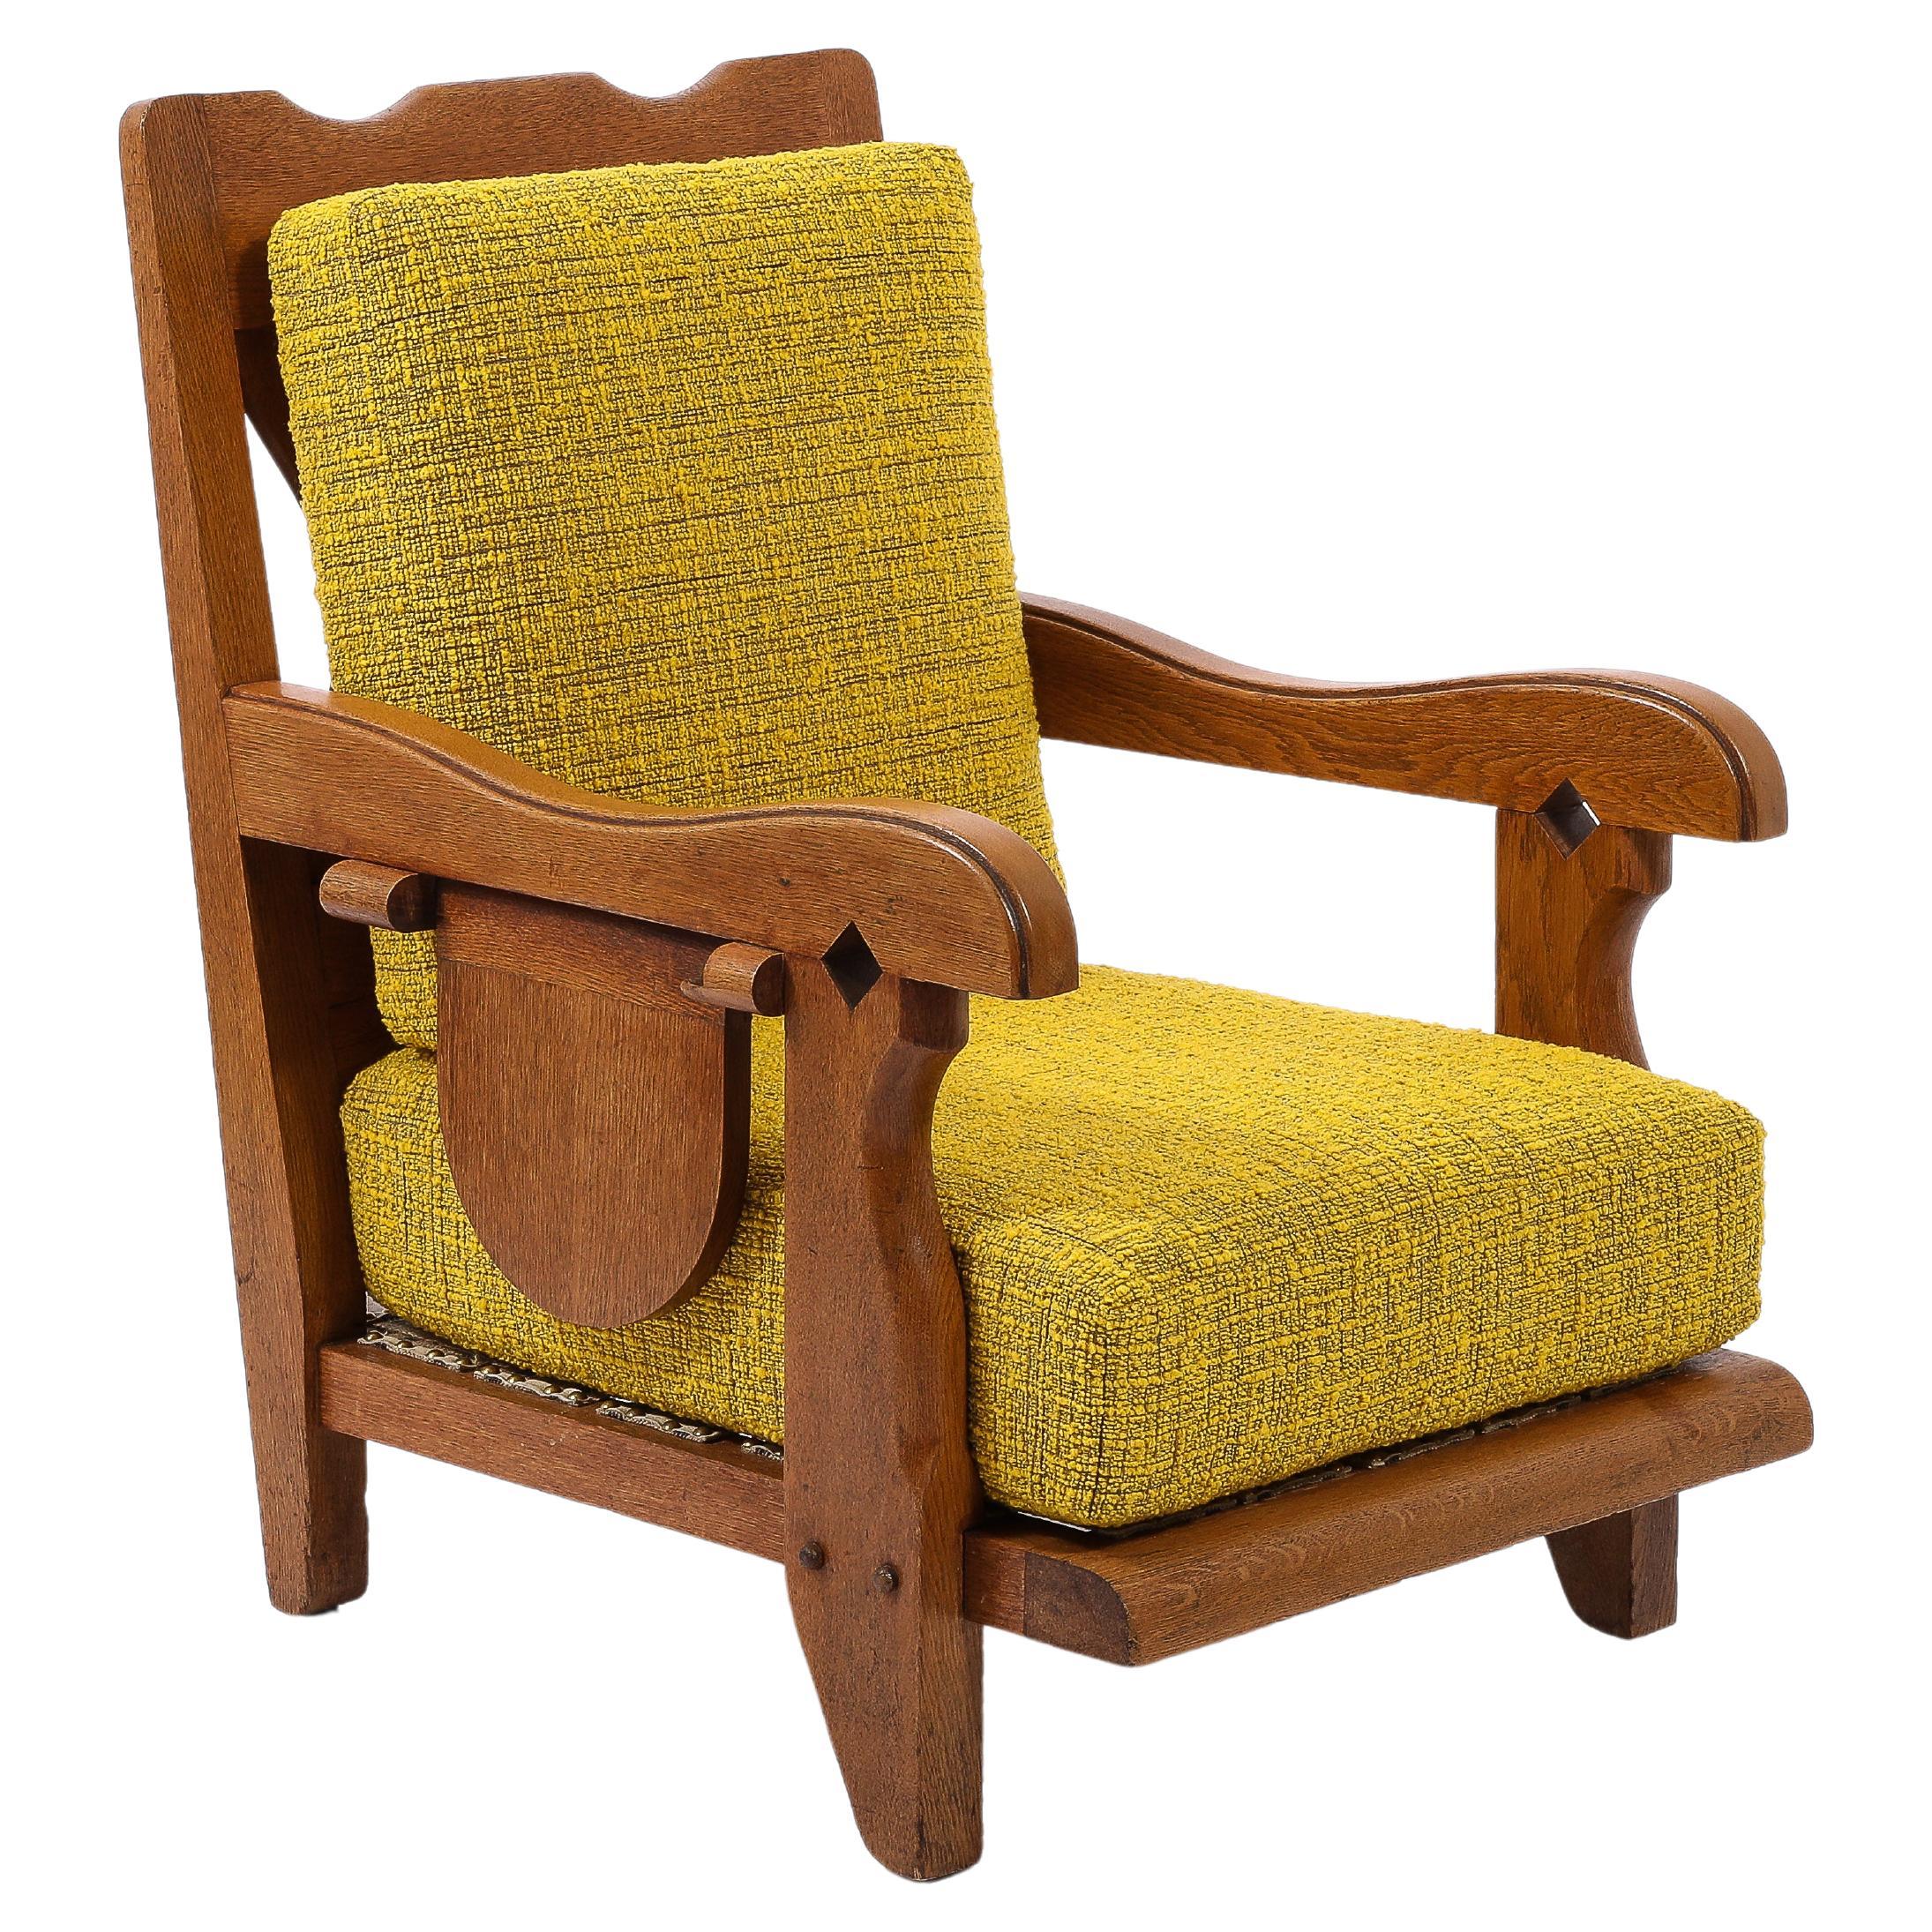 Large Oak & Yellow Wool Armchair with side Shelf, France 1950's For Sale